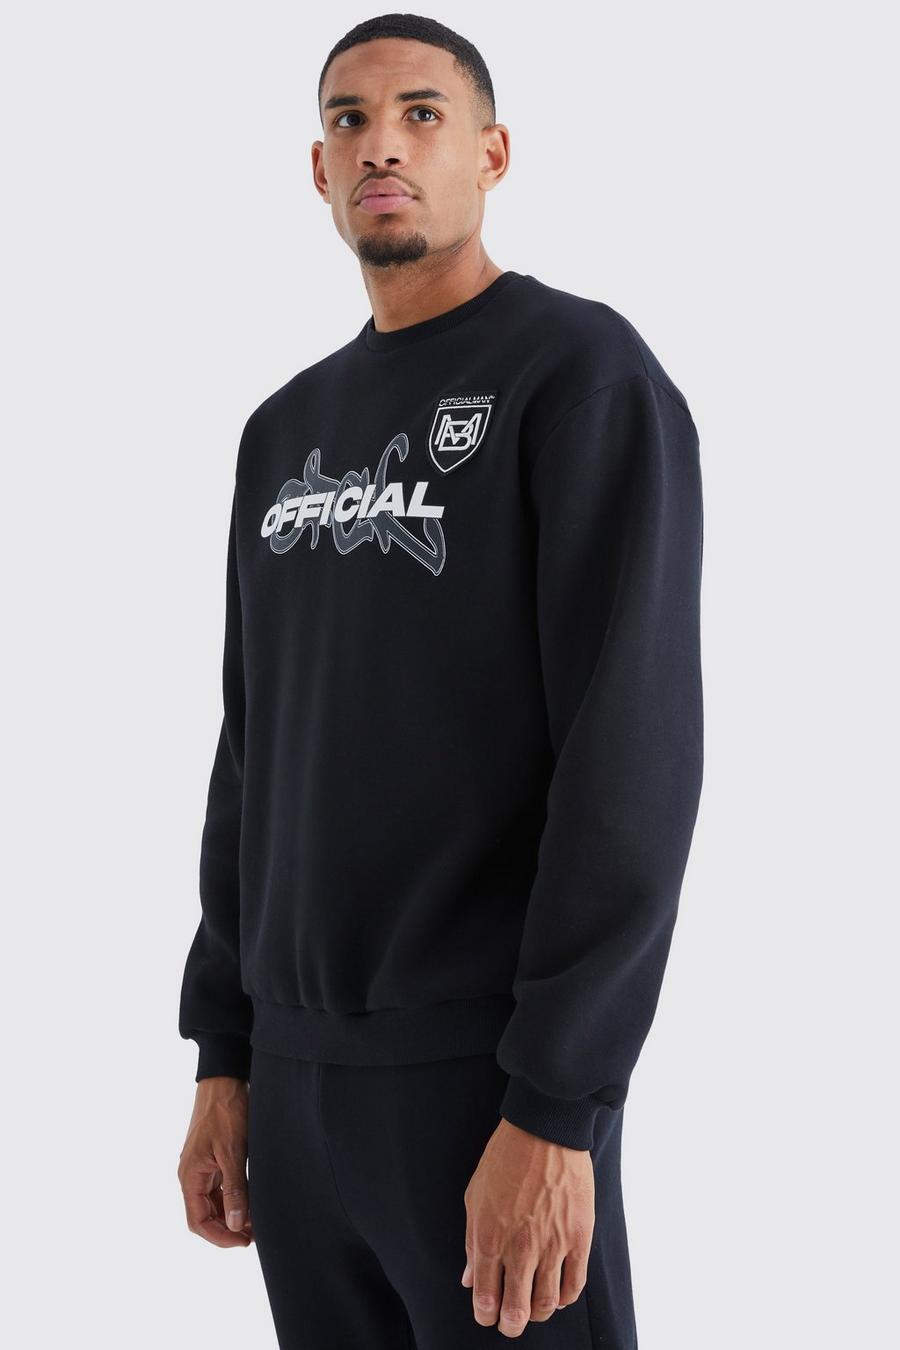 Black Tall Official Oversized Sweat